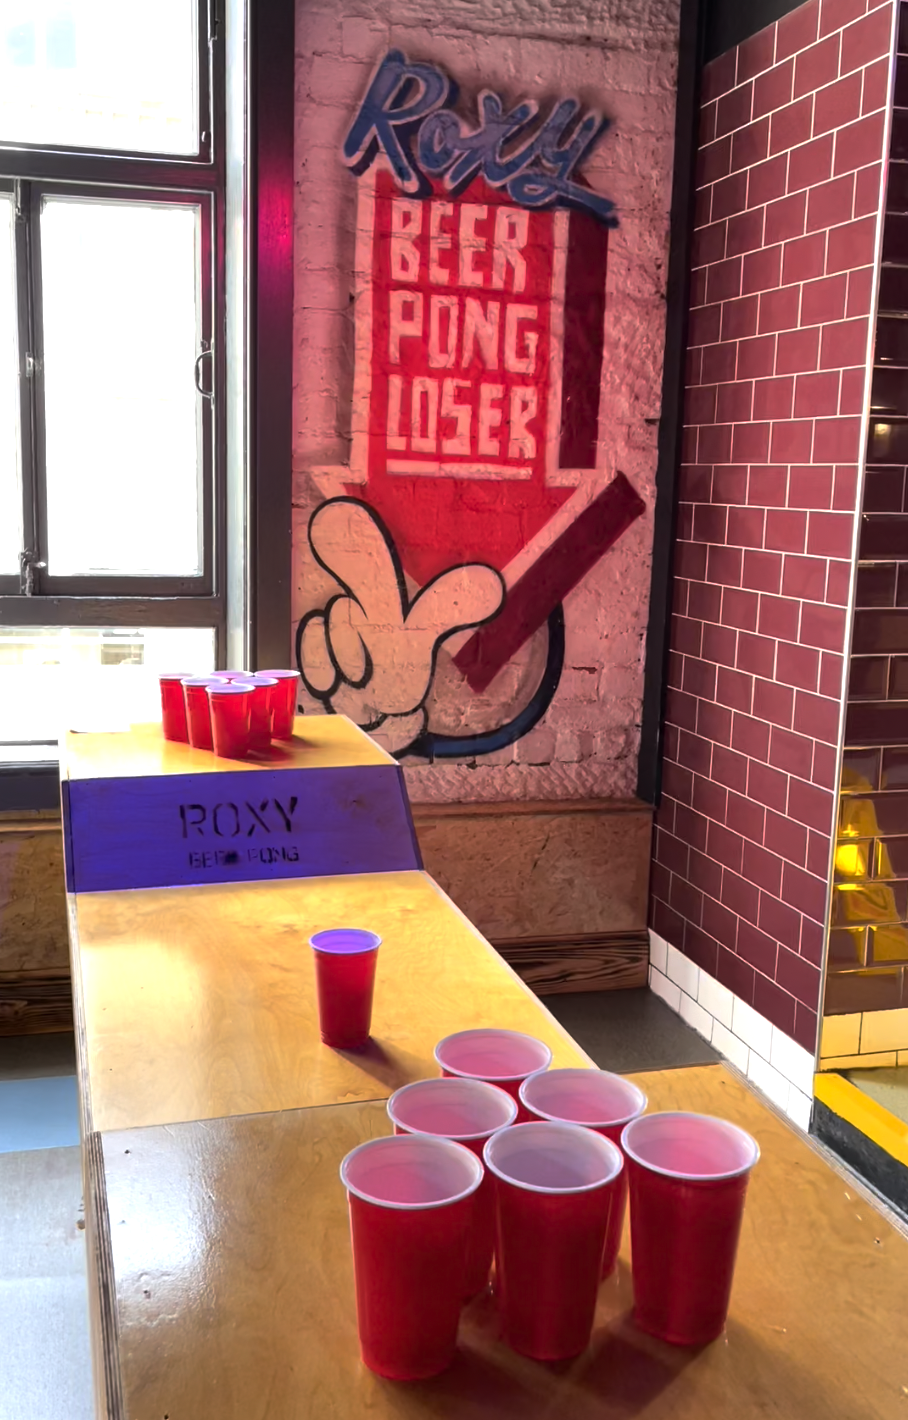 beer pong set up with red cups.